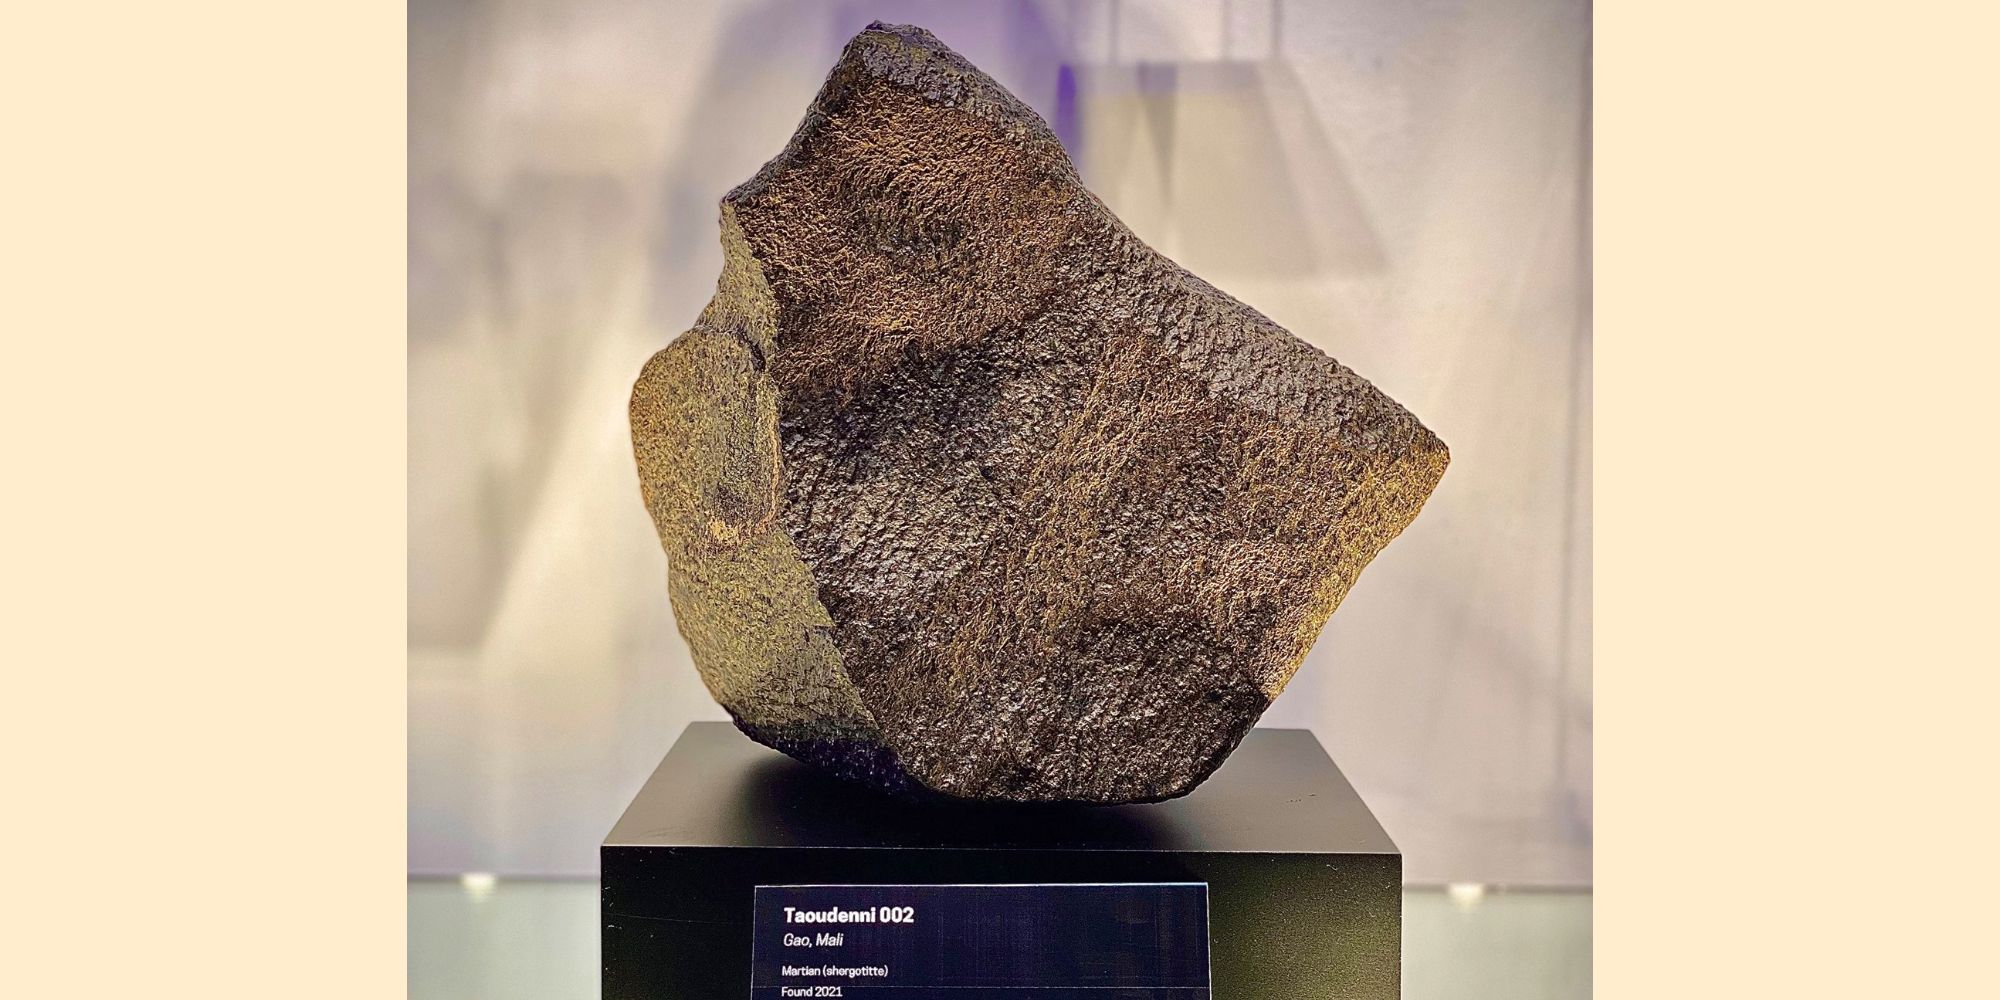 This Is The Largest Mars Rock On Earth And Now You Can See It In Person